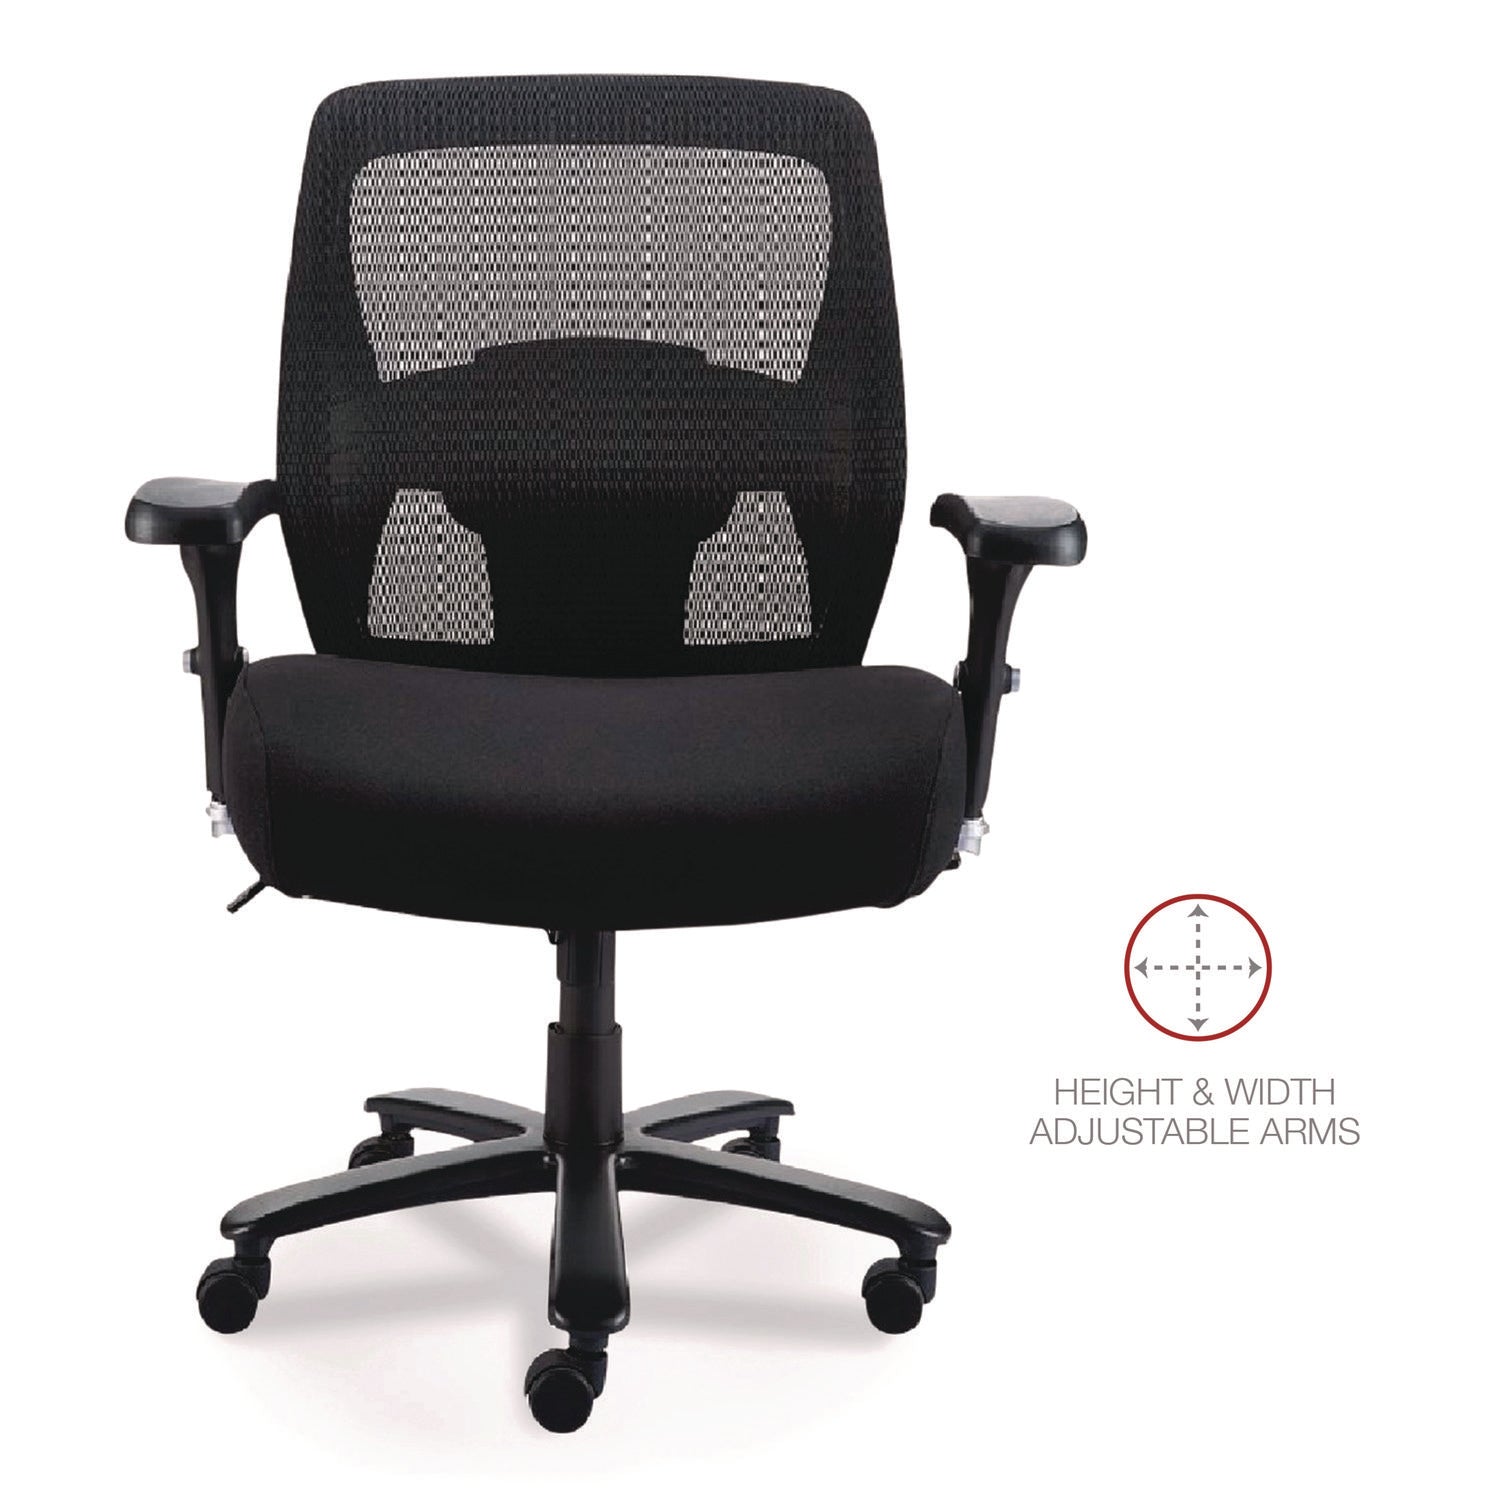 Alera Faseny Series Big and Tall Manager Chair, Supports Up to 400 lbs, 17.48" to 21.73" Seat Height, Black Seat/Back/Base - 6